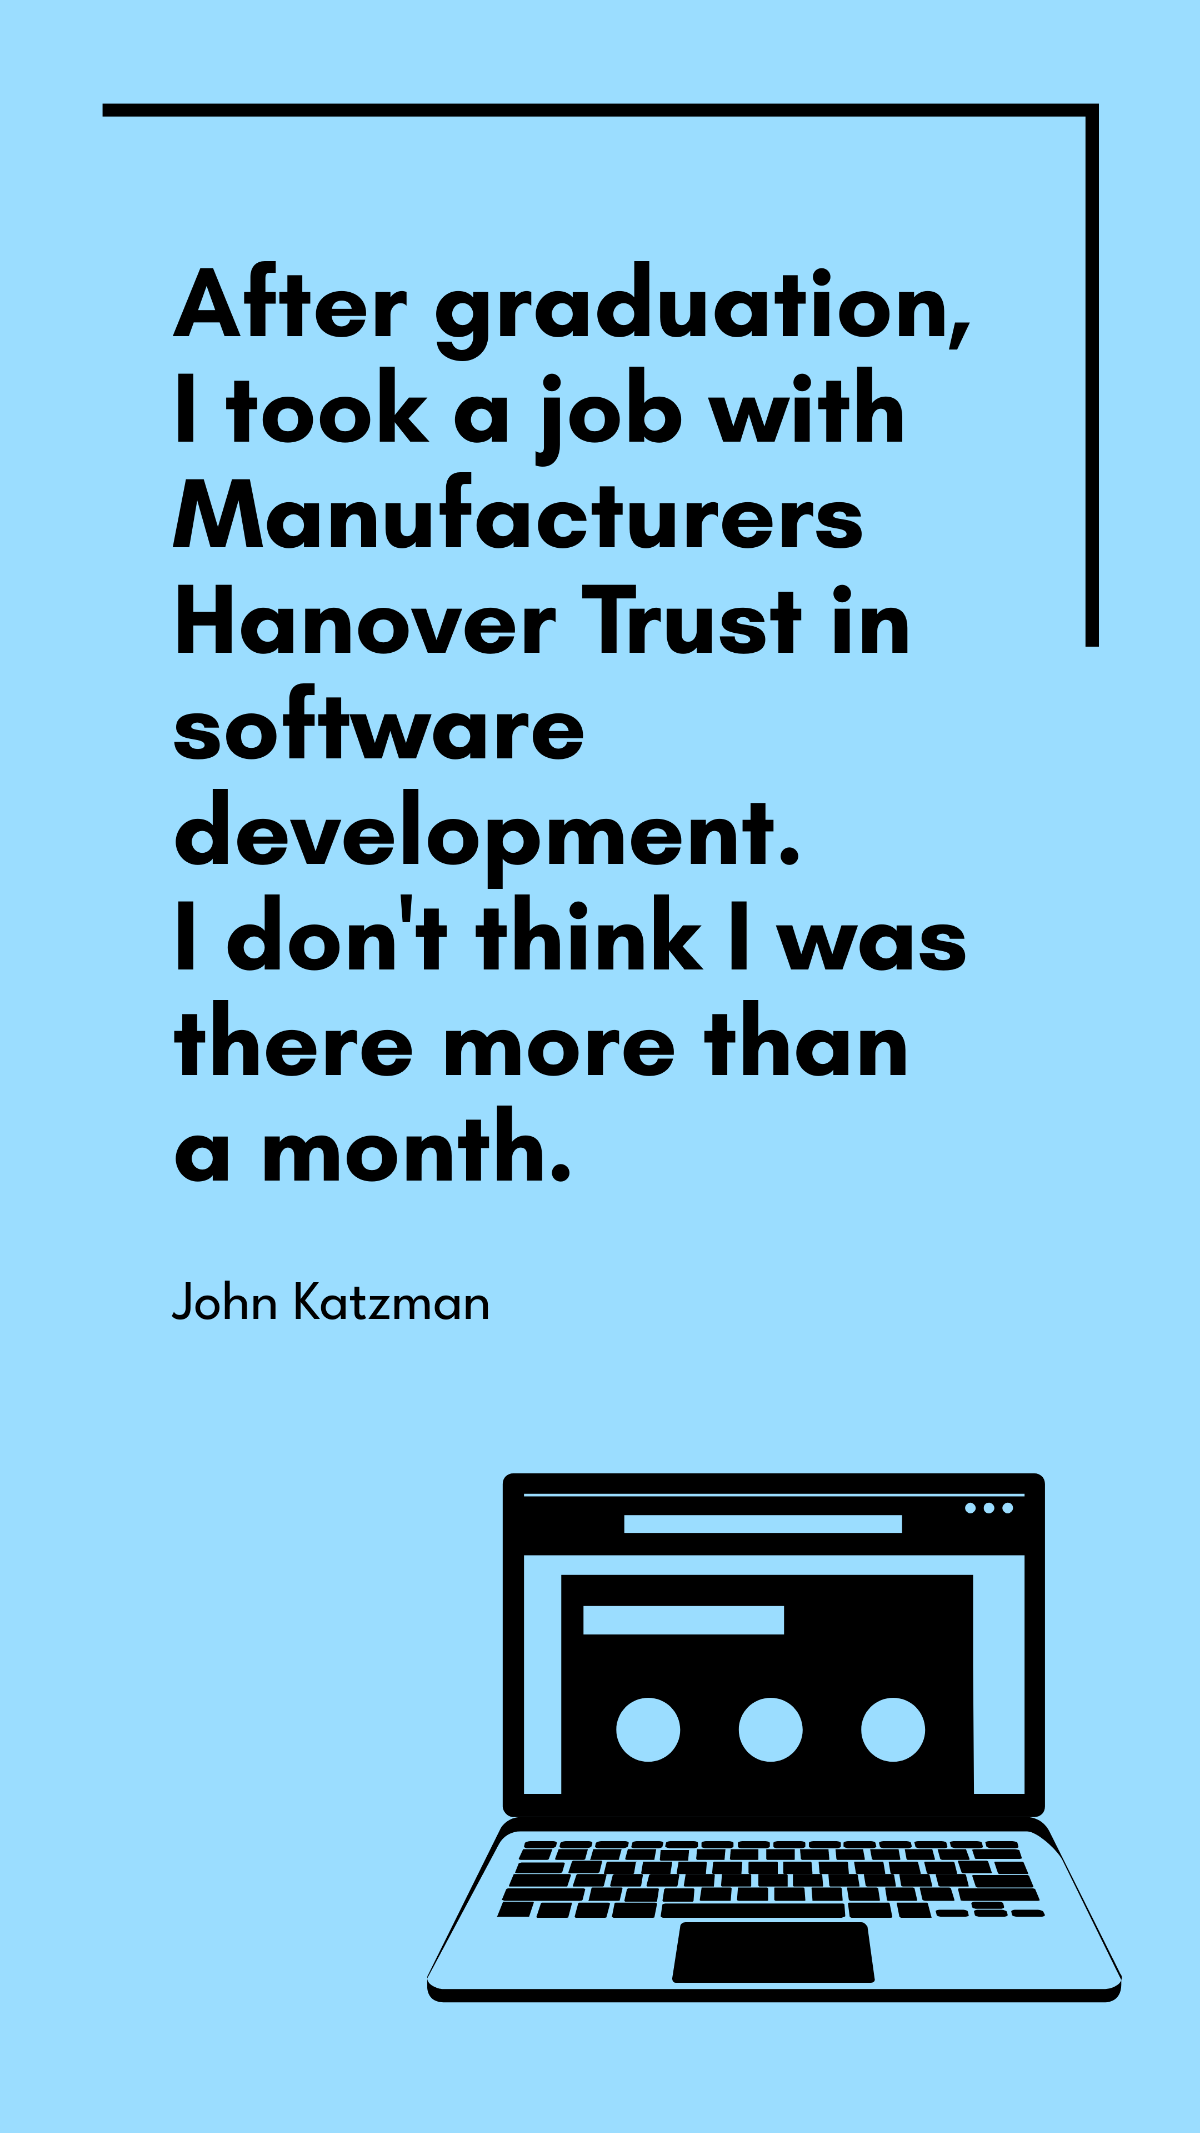 Free John Katzman - After graduation, I took a job with Manufacturers Hanover Trust in software development. I don't think I was there more than a month. Template